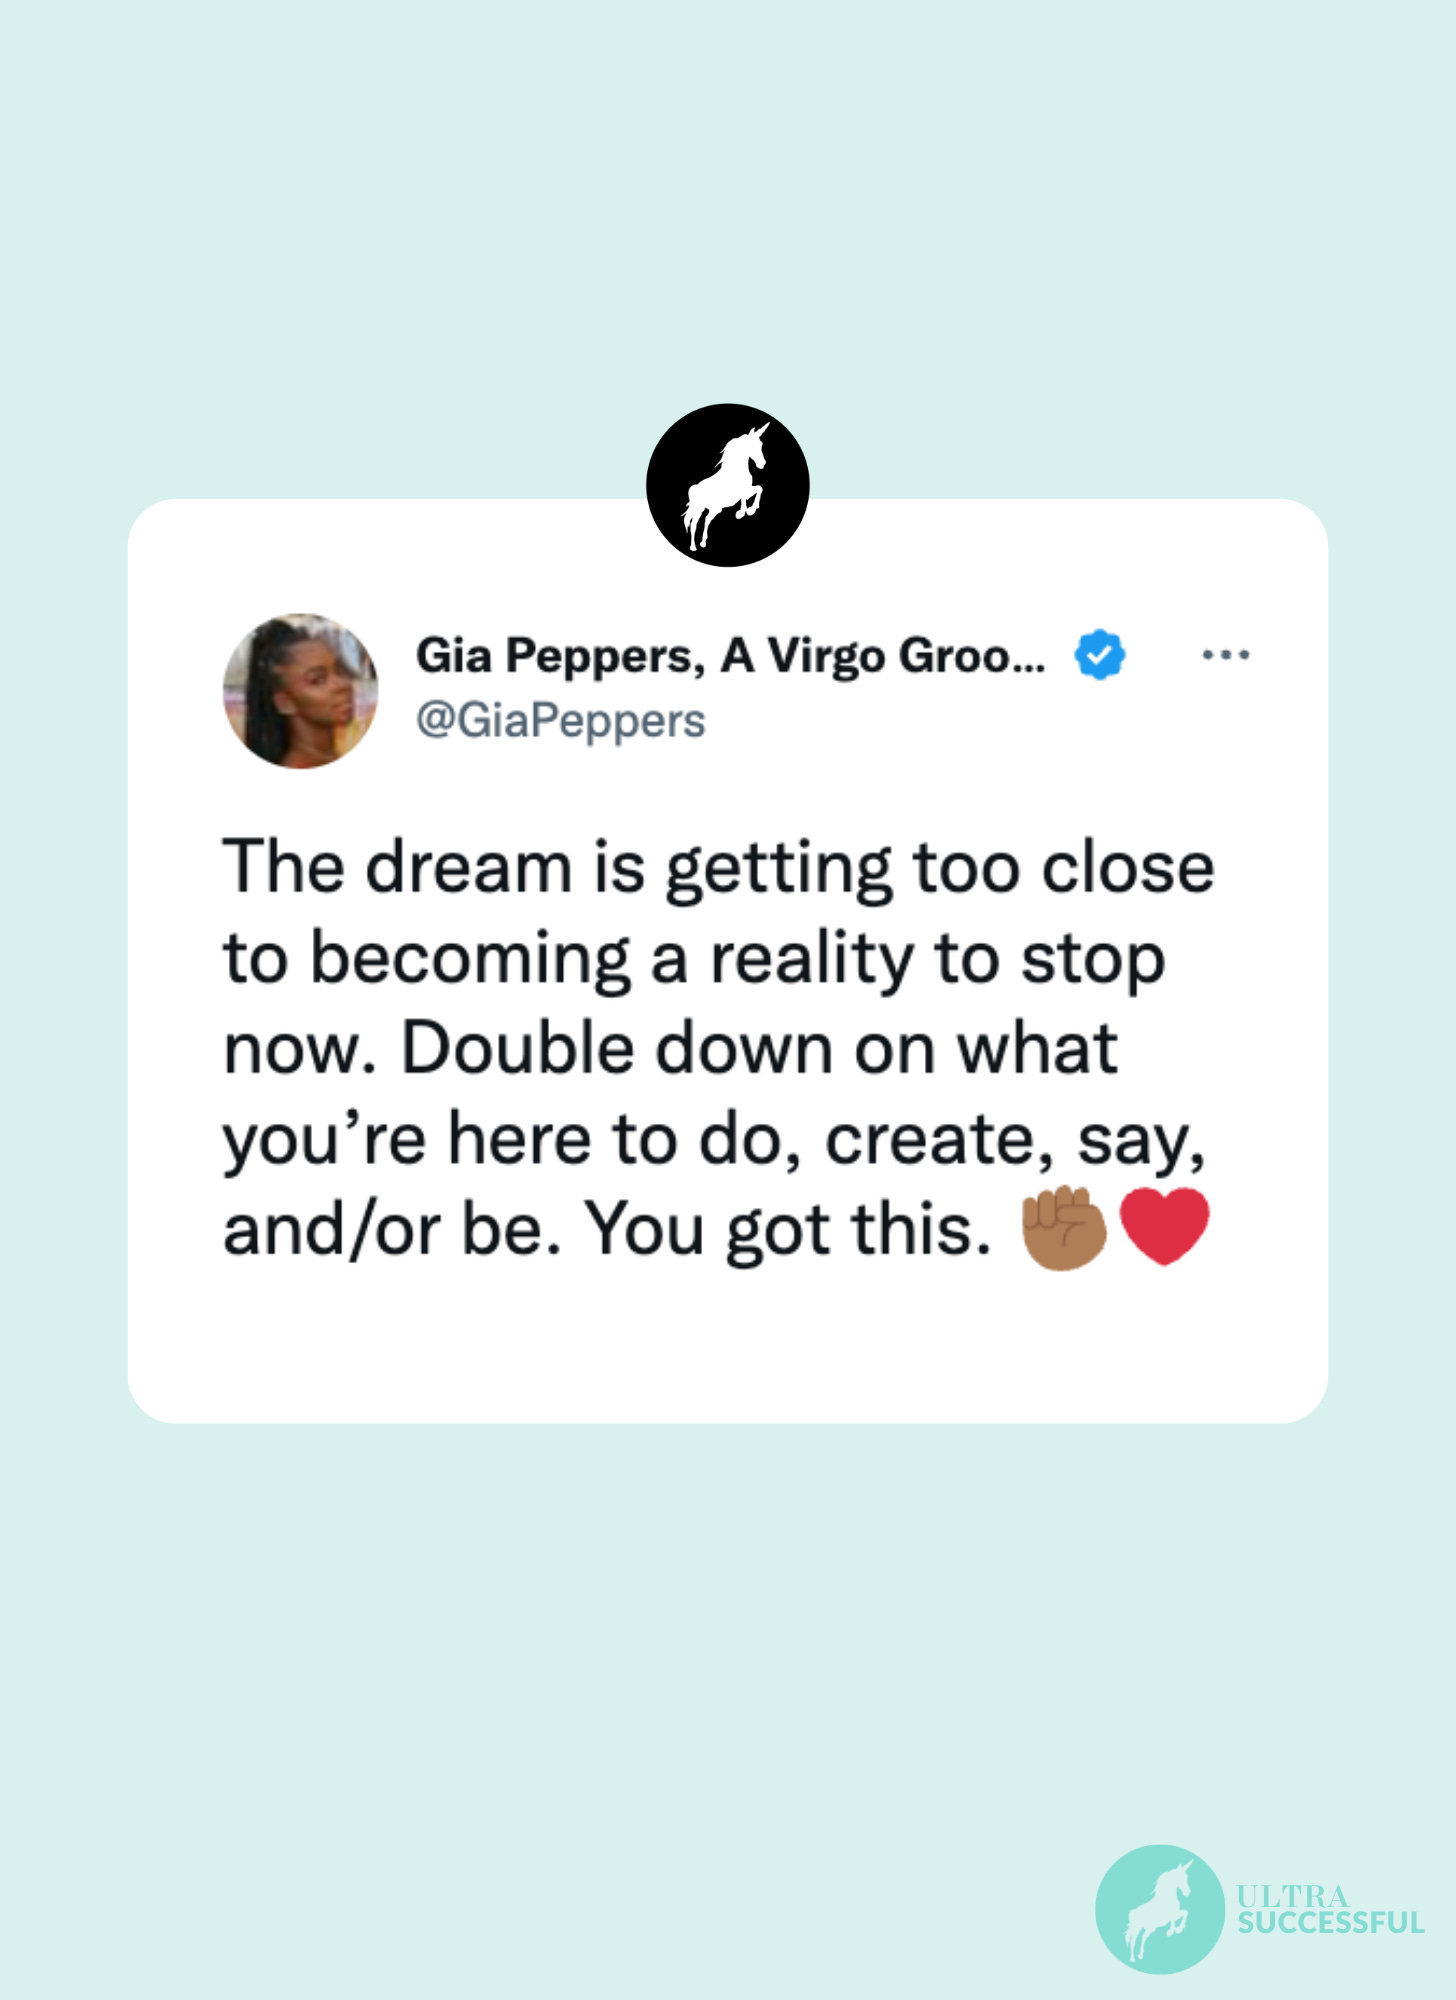 @giapeppers: The dream is getting too close to becoming a reality to stop now. Double down on what you’re here to do, create, say, and/or be. You got this. ✊🏾❤️